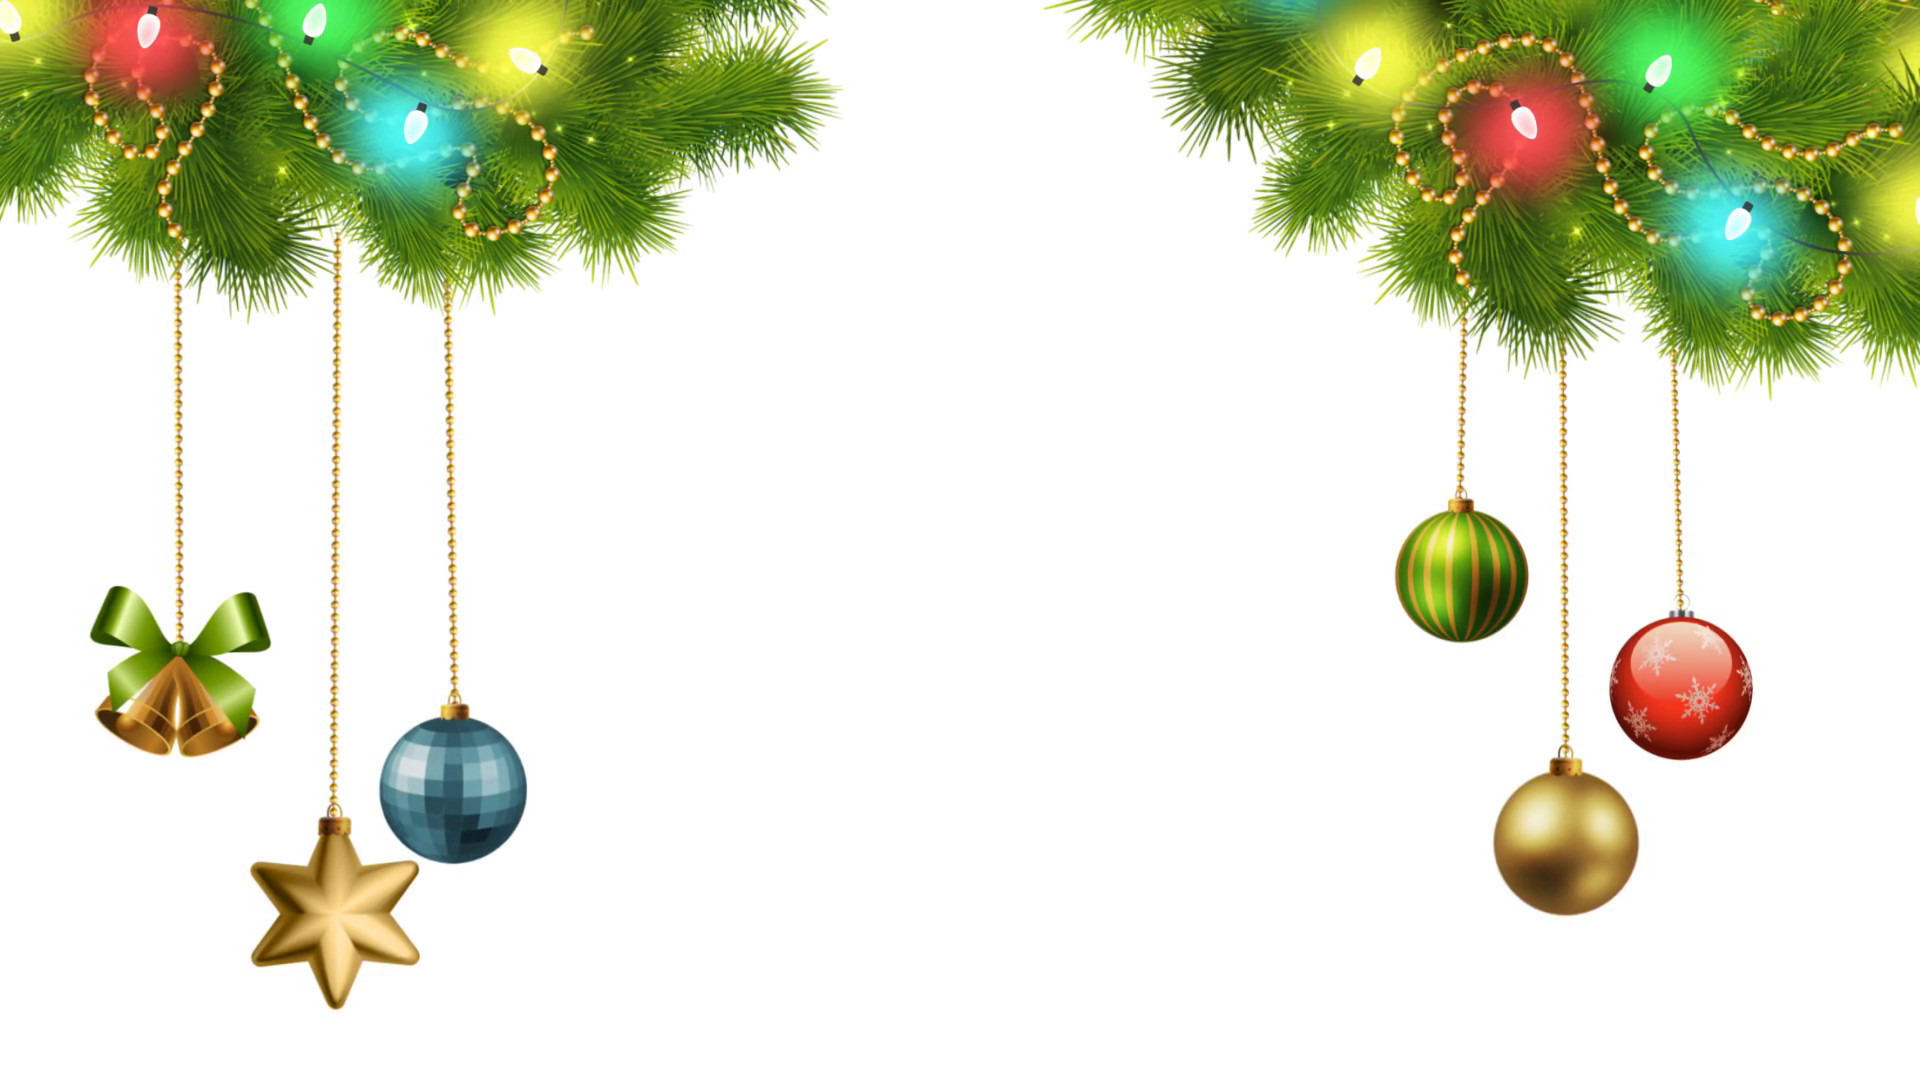 1920x1080 Christmas Decorations And Lights On Transparent Background For Your Card 01  Motion Background - Storyblocks Video